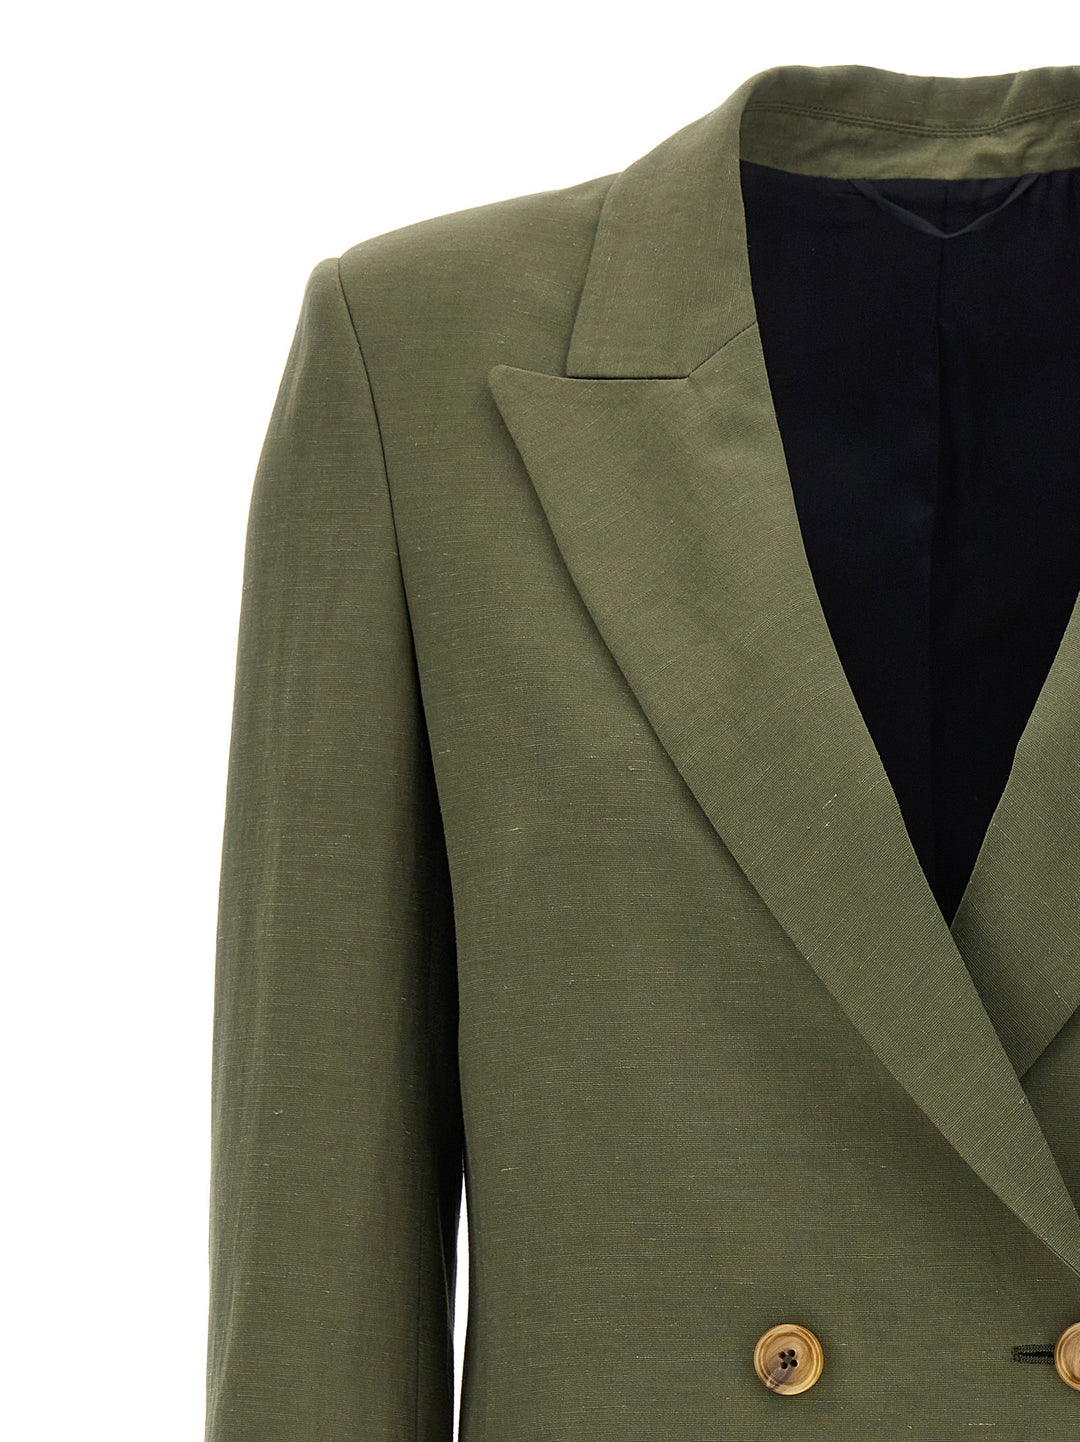 Rox Star Everyday Blazer And Suits Verde